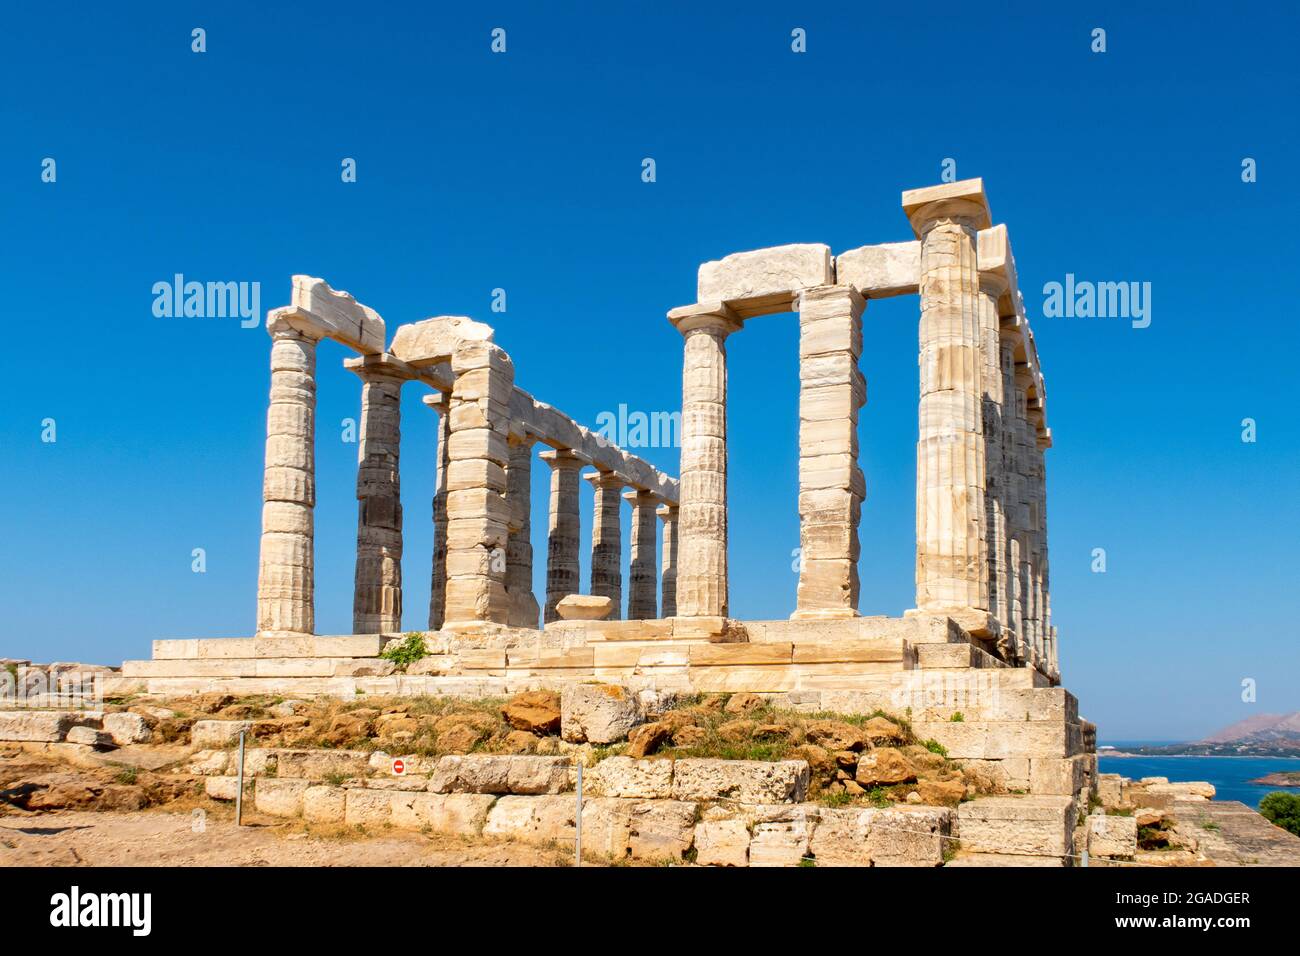 The ancient Greek Temple of Poseidon at Cape Sounion, doric columns and ruins on the hill with crystal blue sky background. Stock Photo